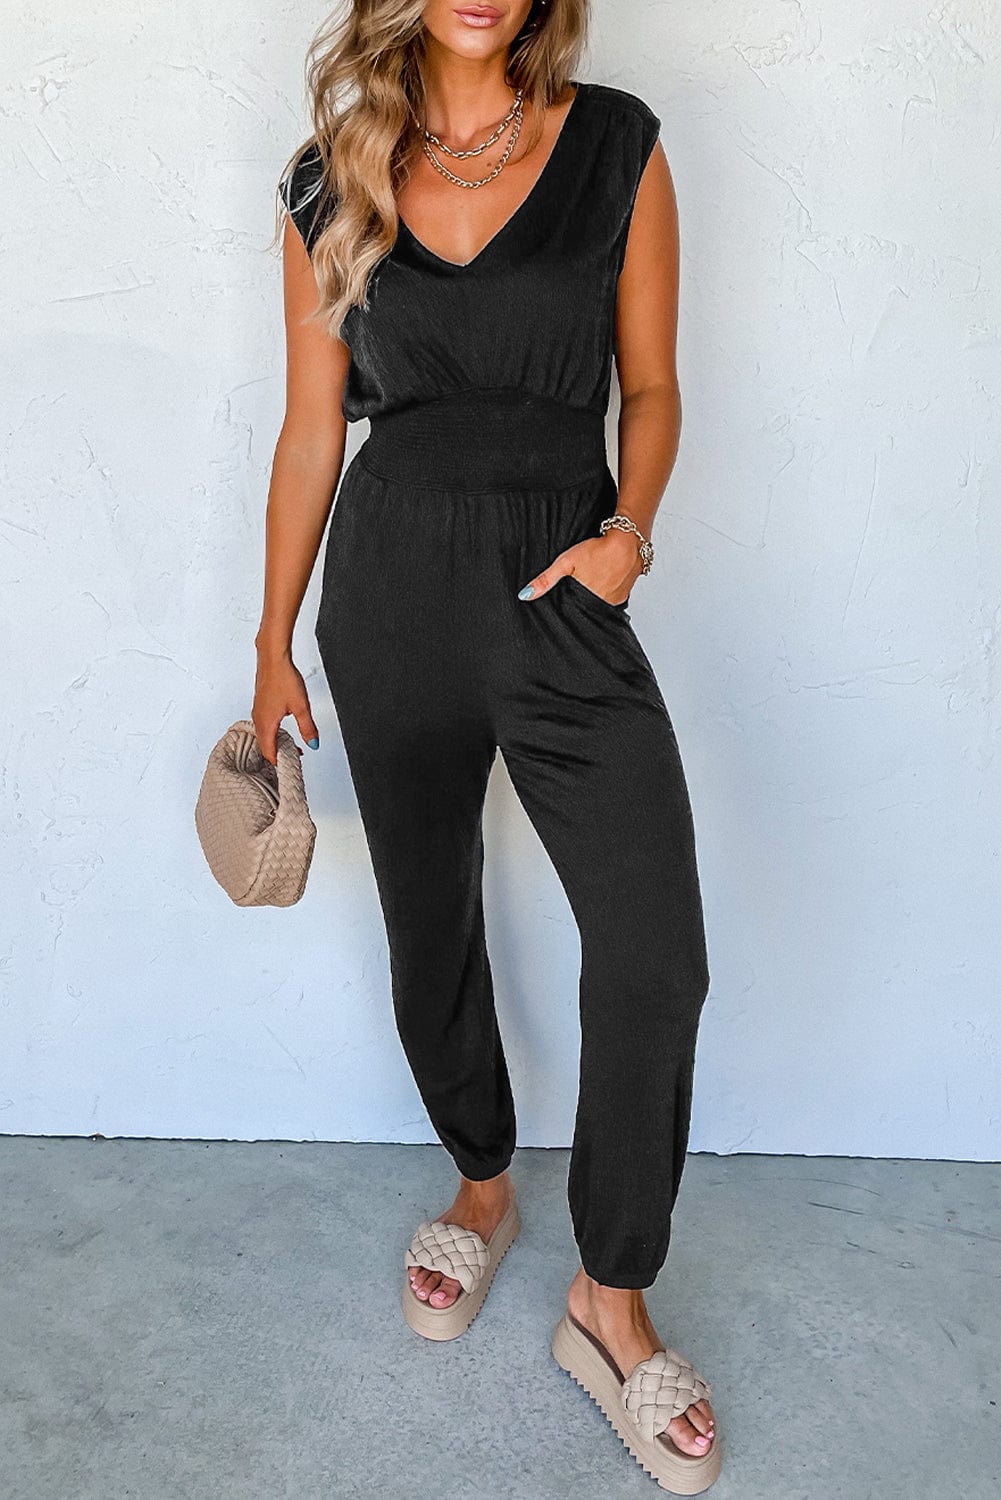 The802Gypsy  jumpsuits and rompers Black / S / 65%Polyester+30%Cotton+5%Elastane TRAVELING GYPSY-High Waist Sleeveless V Neck Jumpsuit